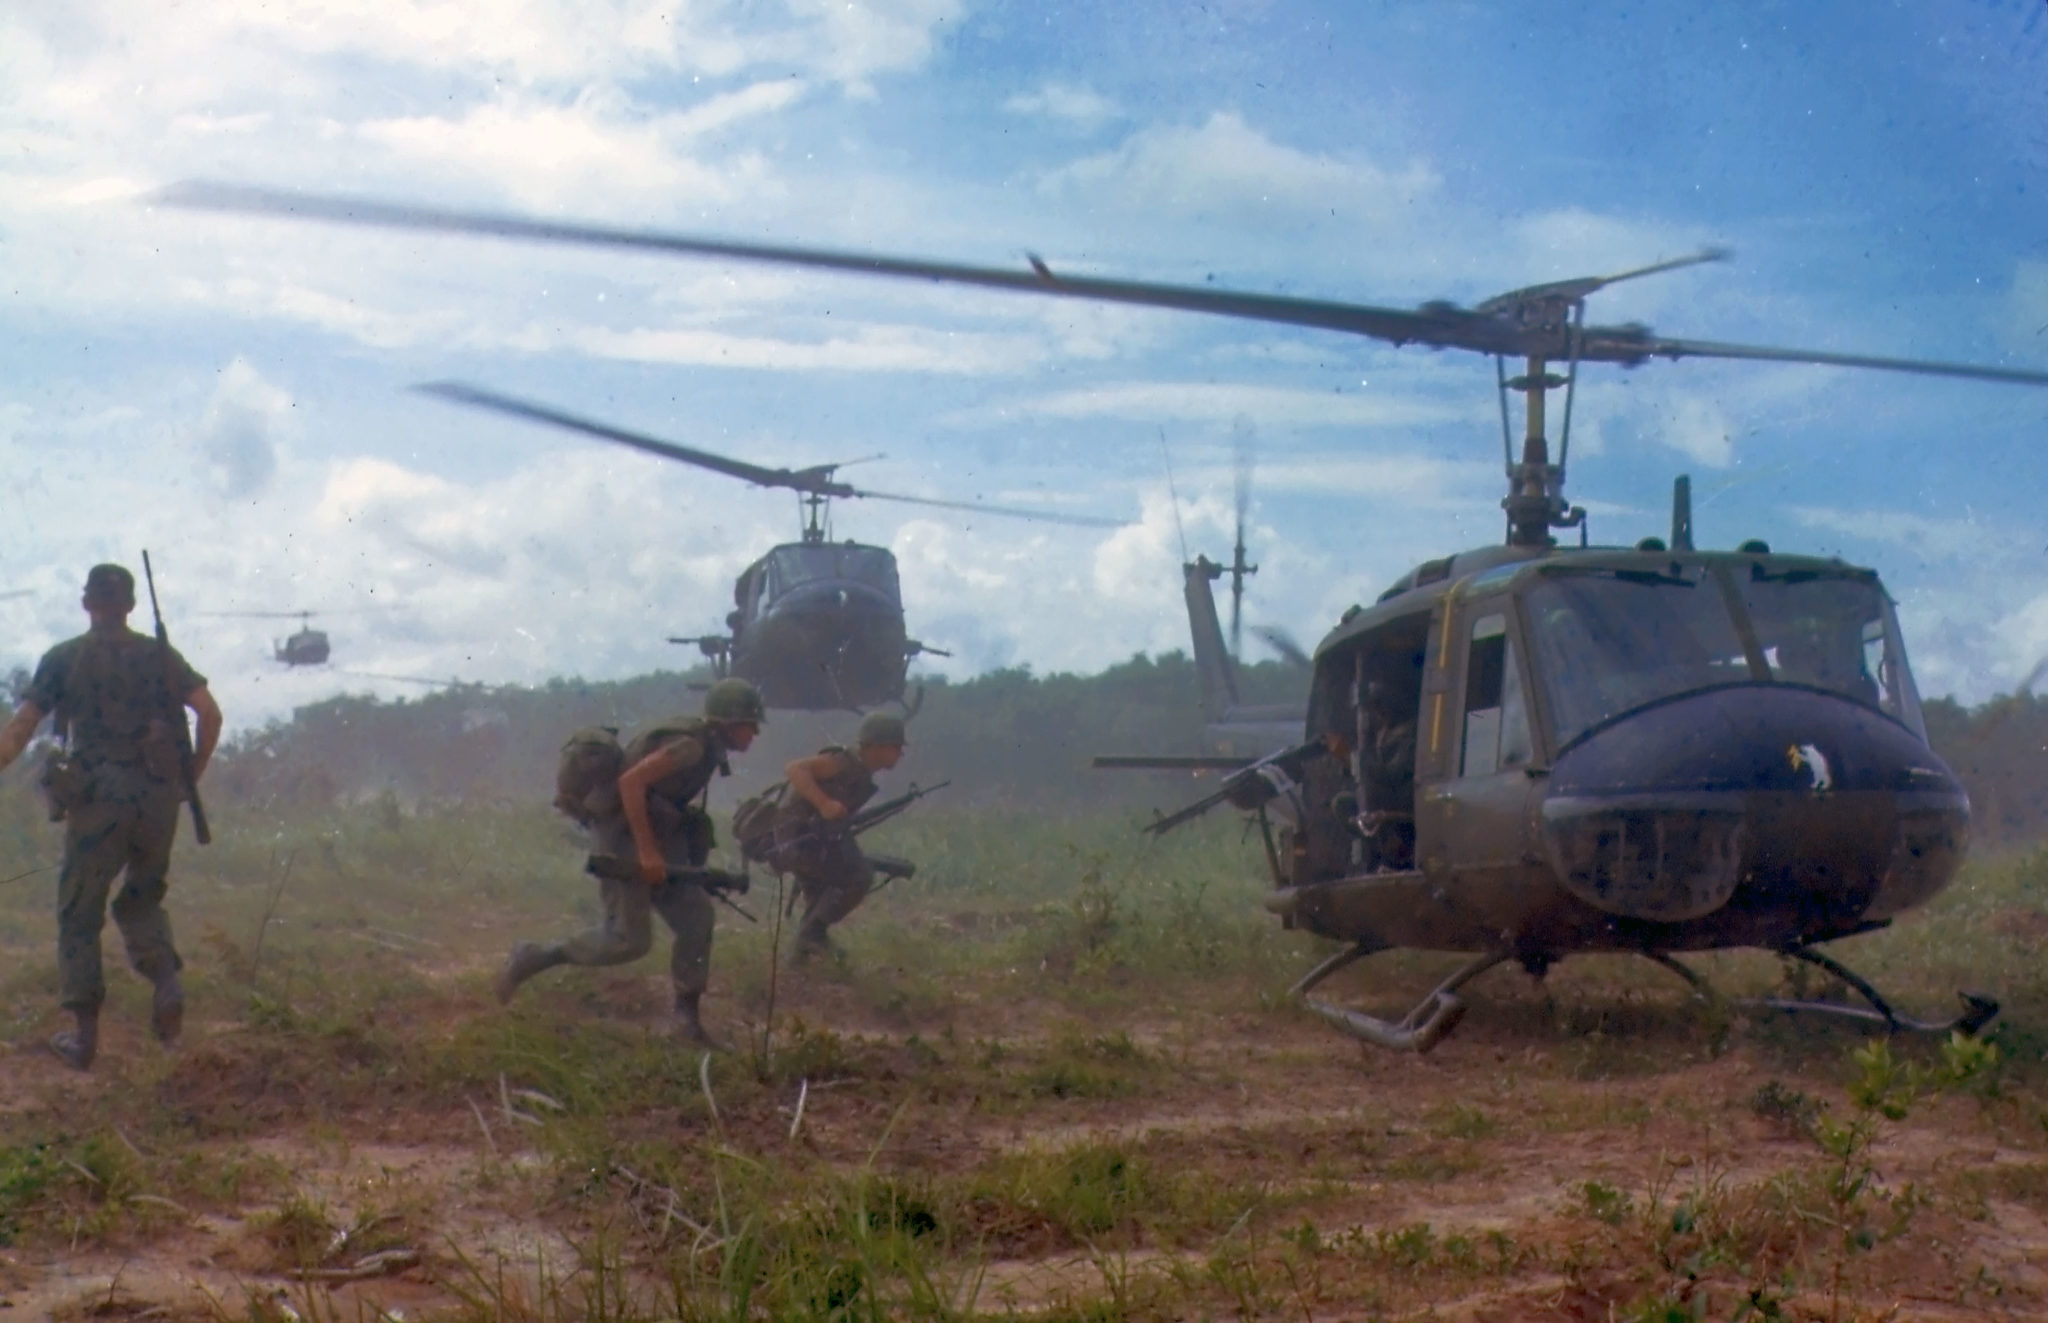 UH-1D_helicopters_in_Vietnam_1966-scaled.jpg